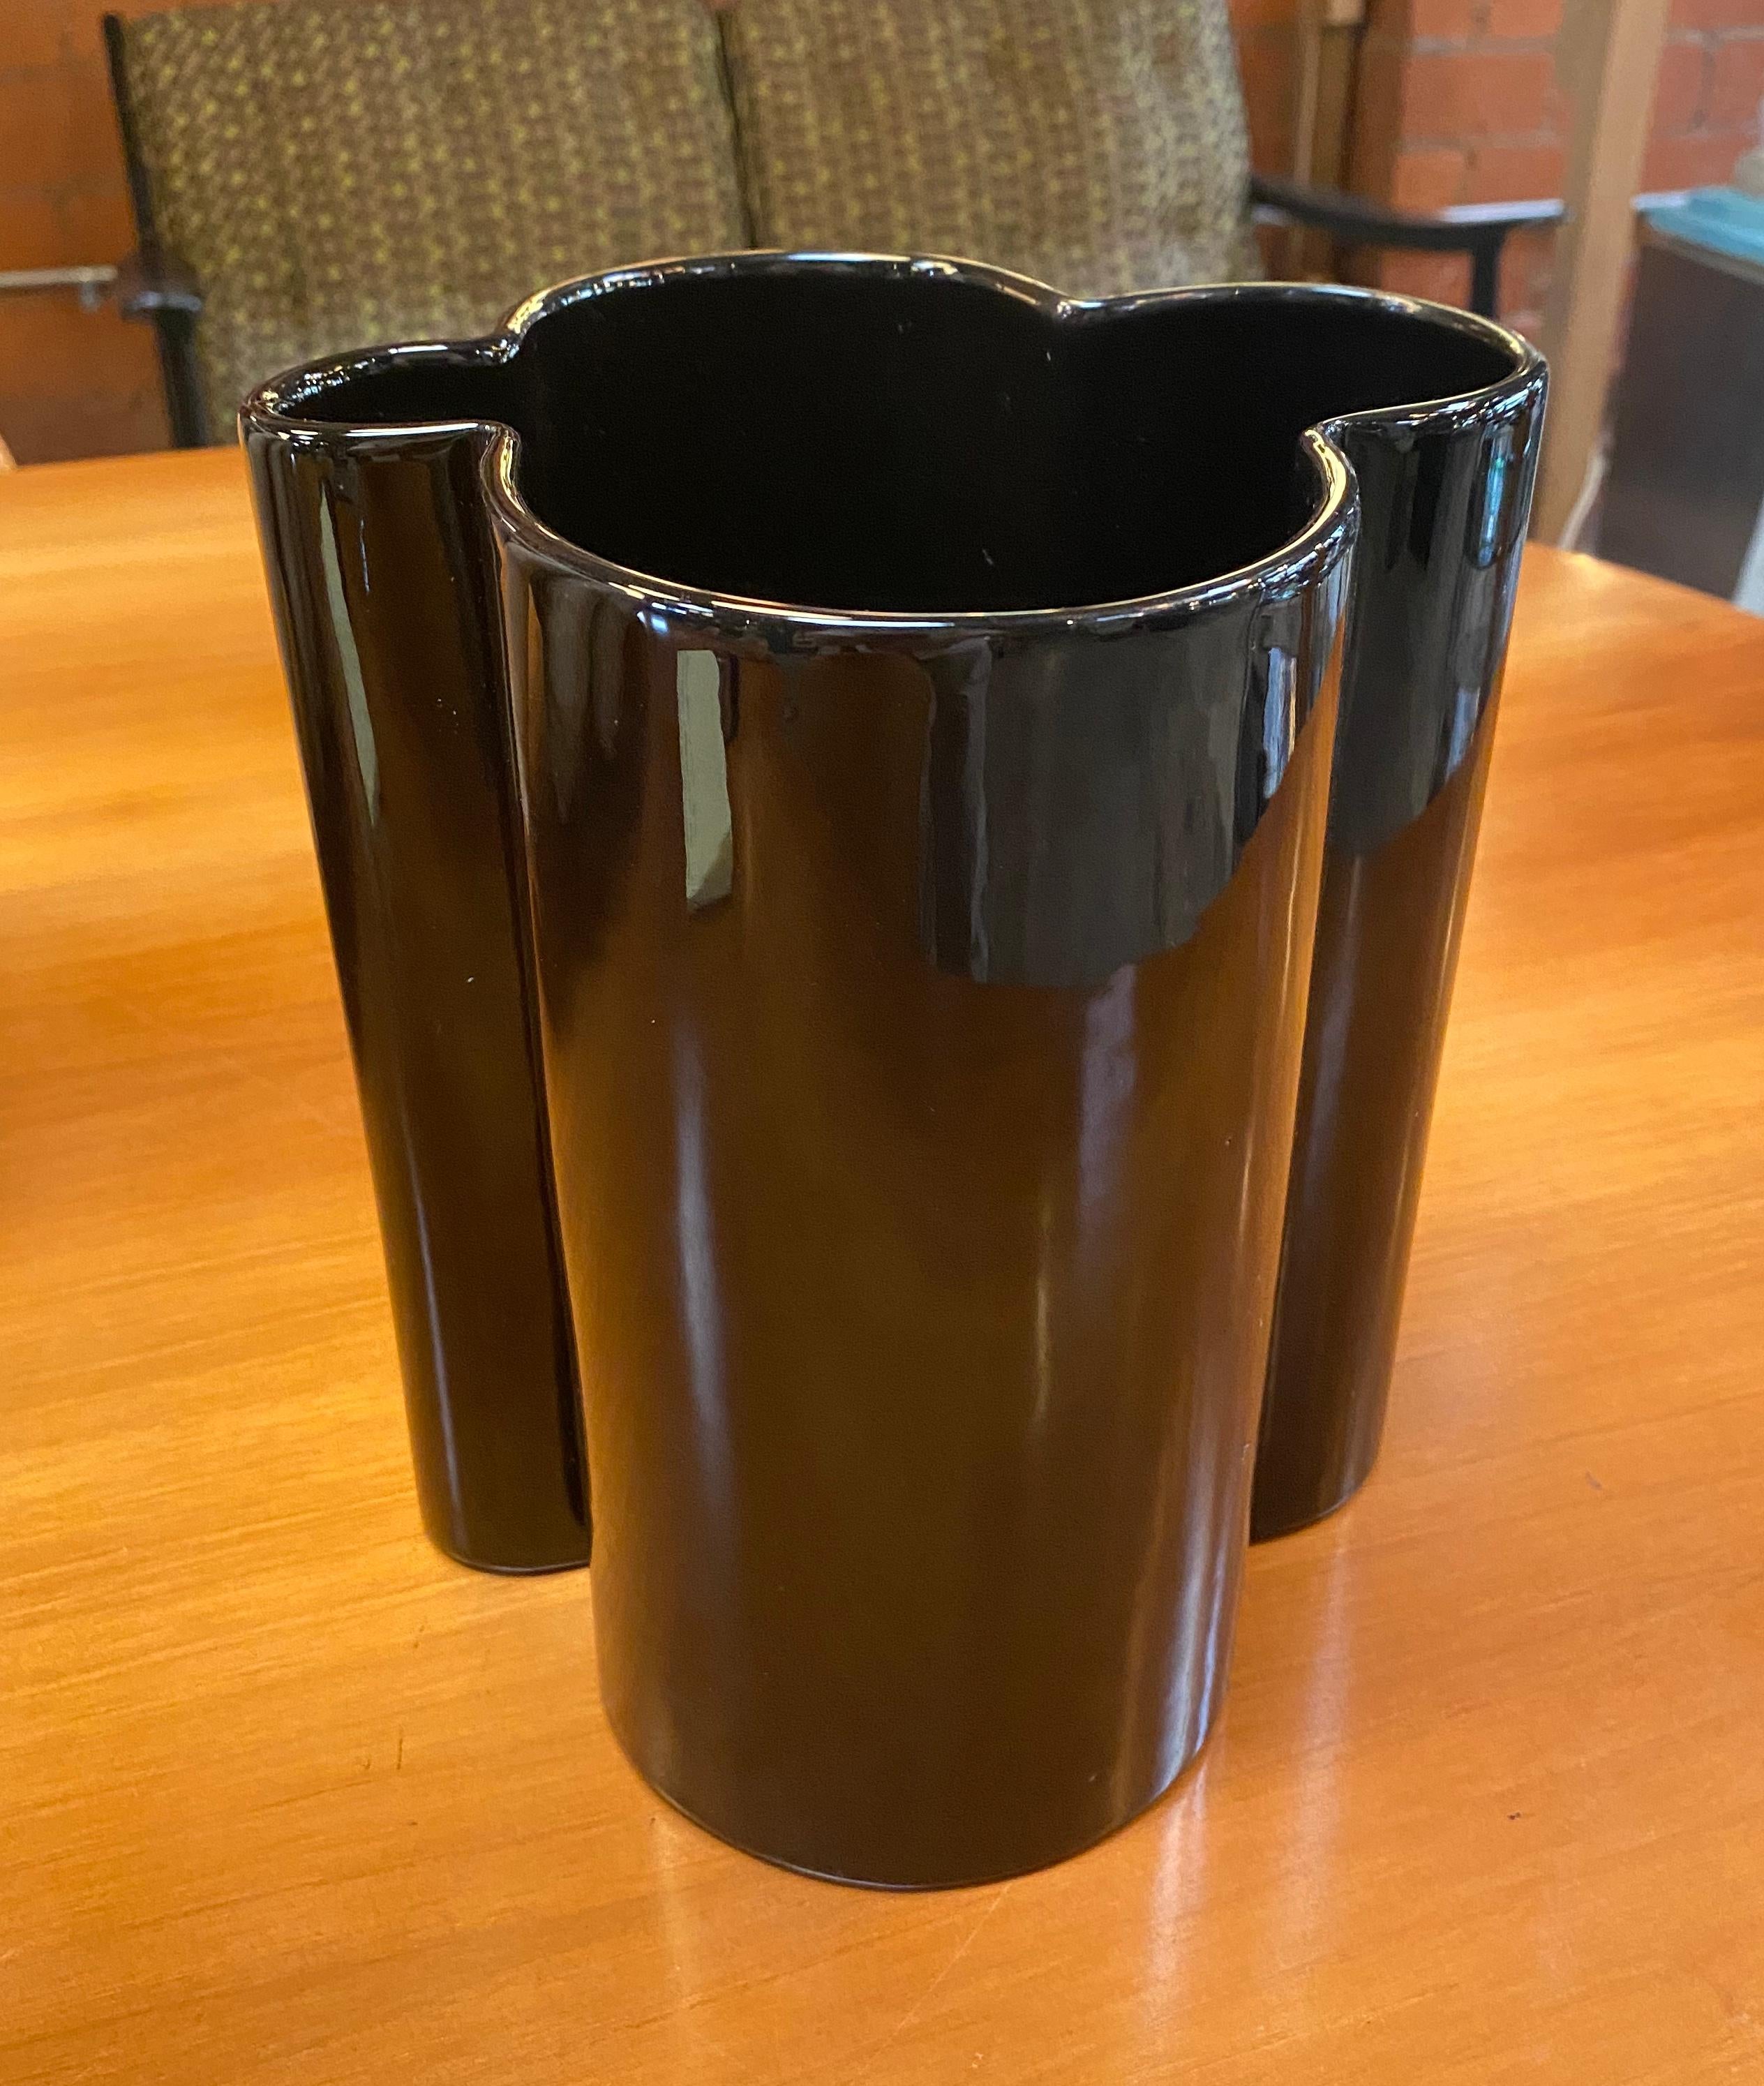 Stunning black glazed ceramic vase. The mouth / opening of the vase has an undulating wave pattern that continues into the rest of the body. These iconic vase are part of the series of vessels designed by Italian architect Angelo Mangiarotti for